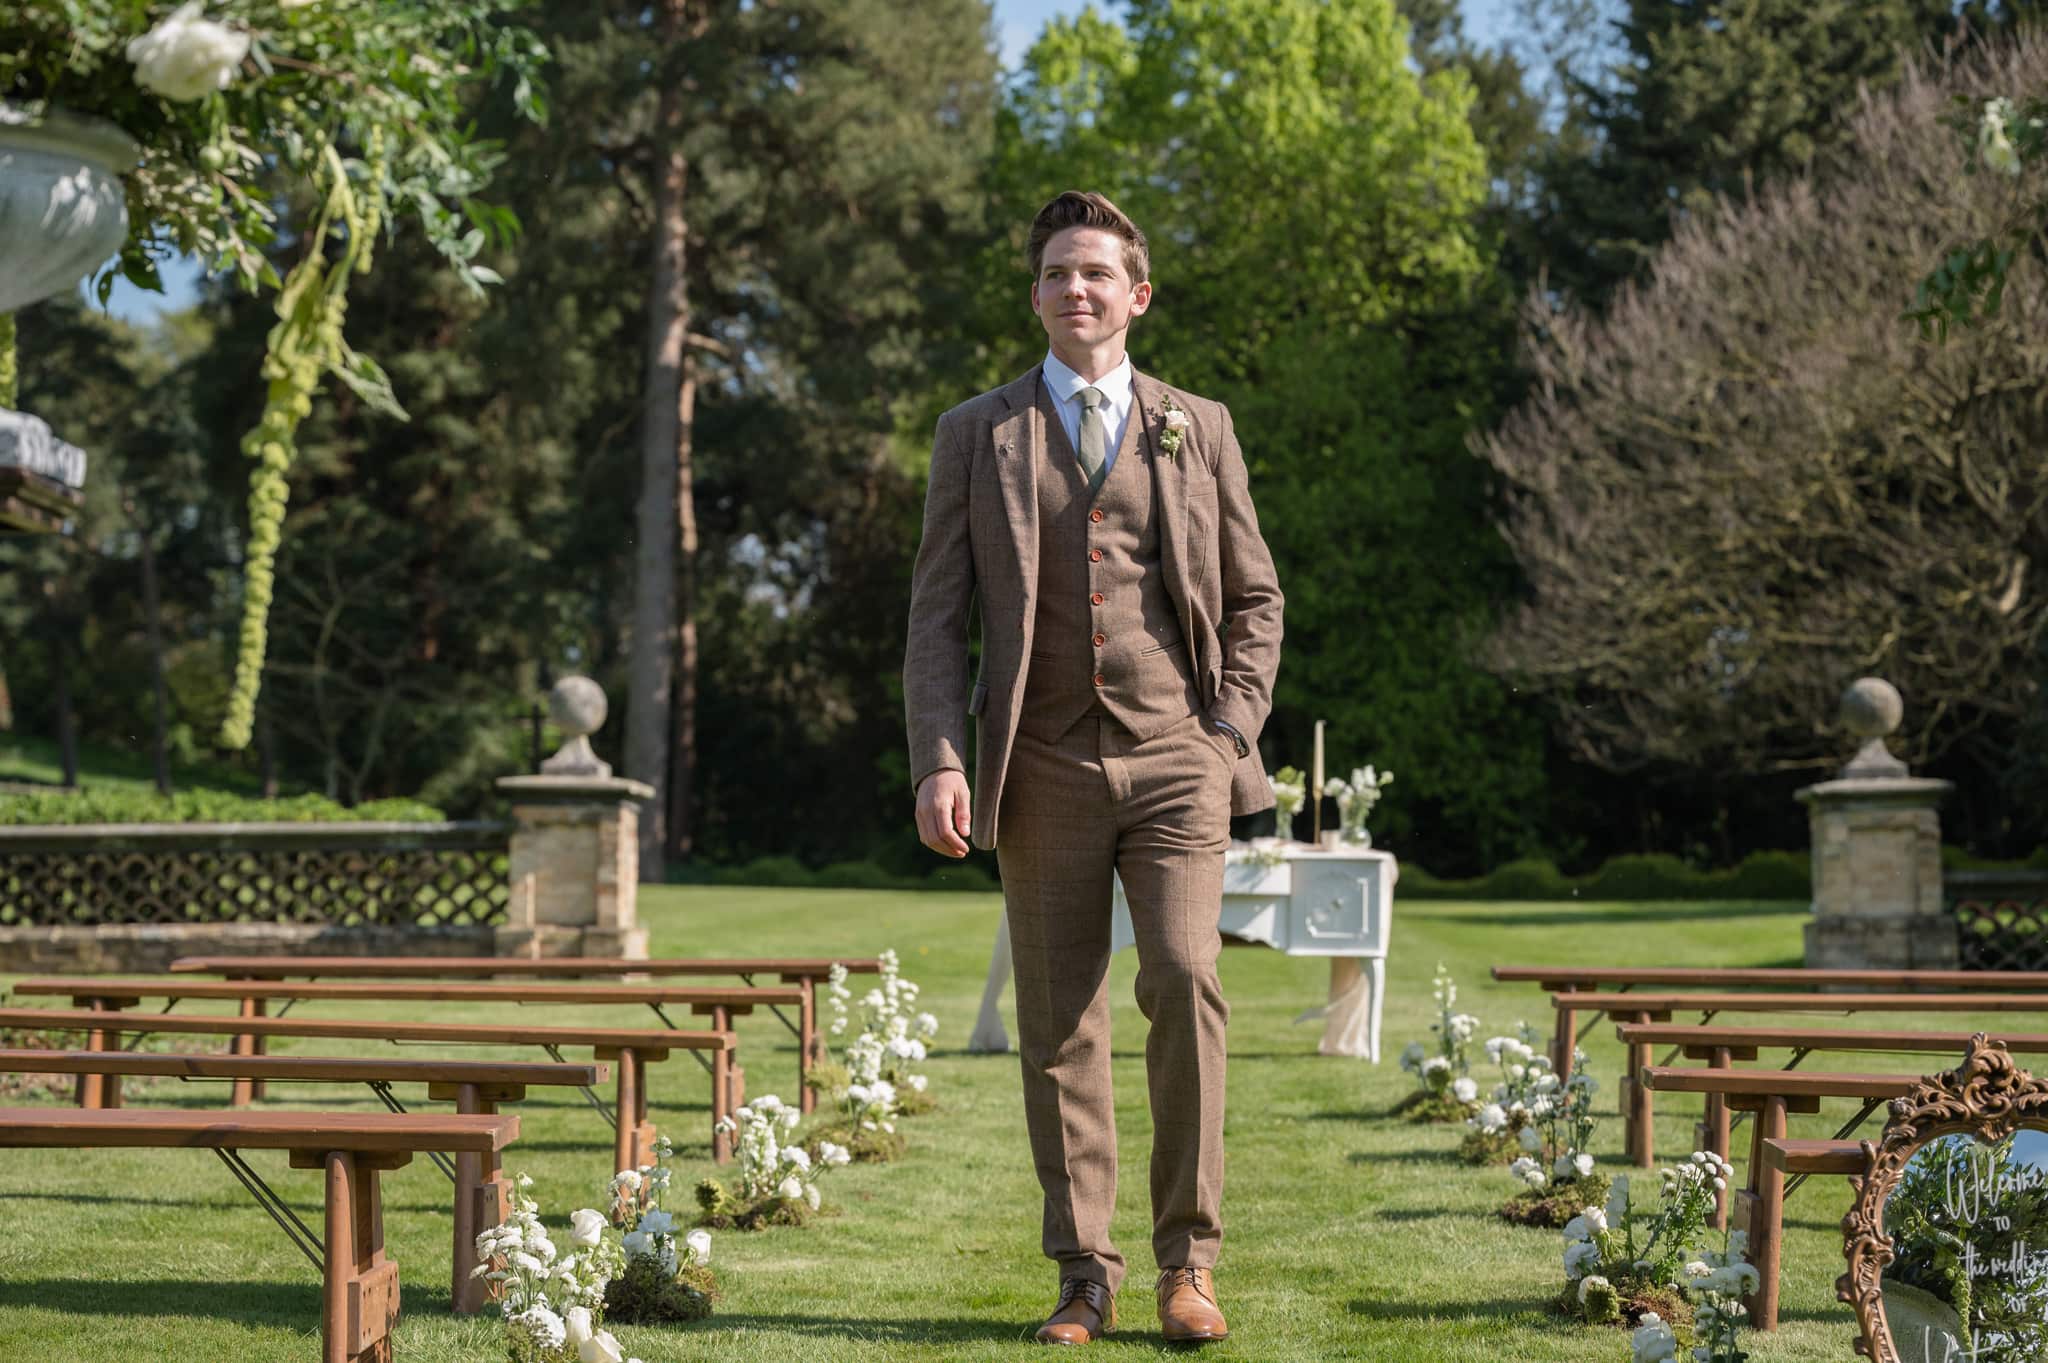 Groom standing between two rows of benches set-up for an outdoor wedding ceremony at Sutton Bonington Hall